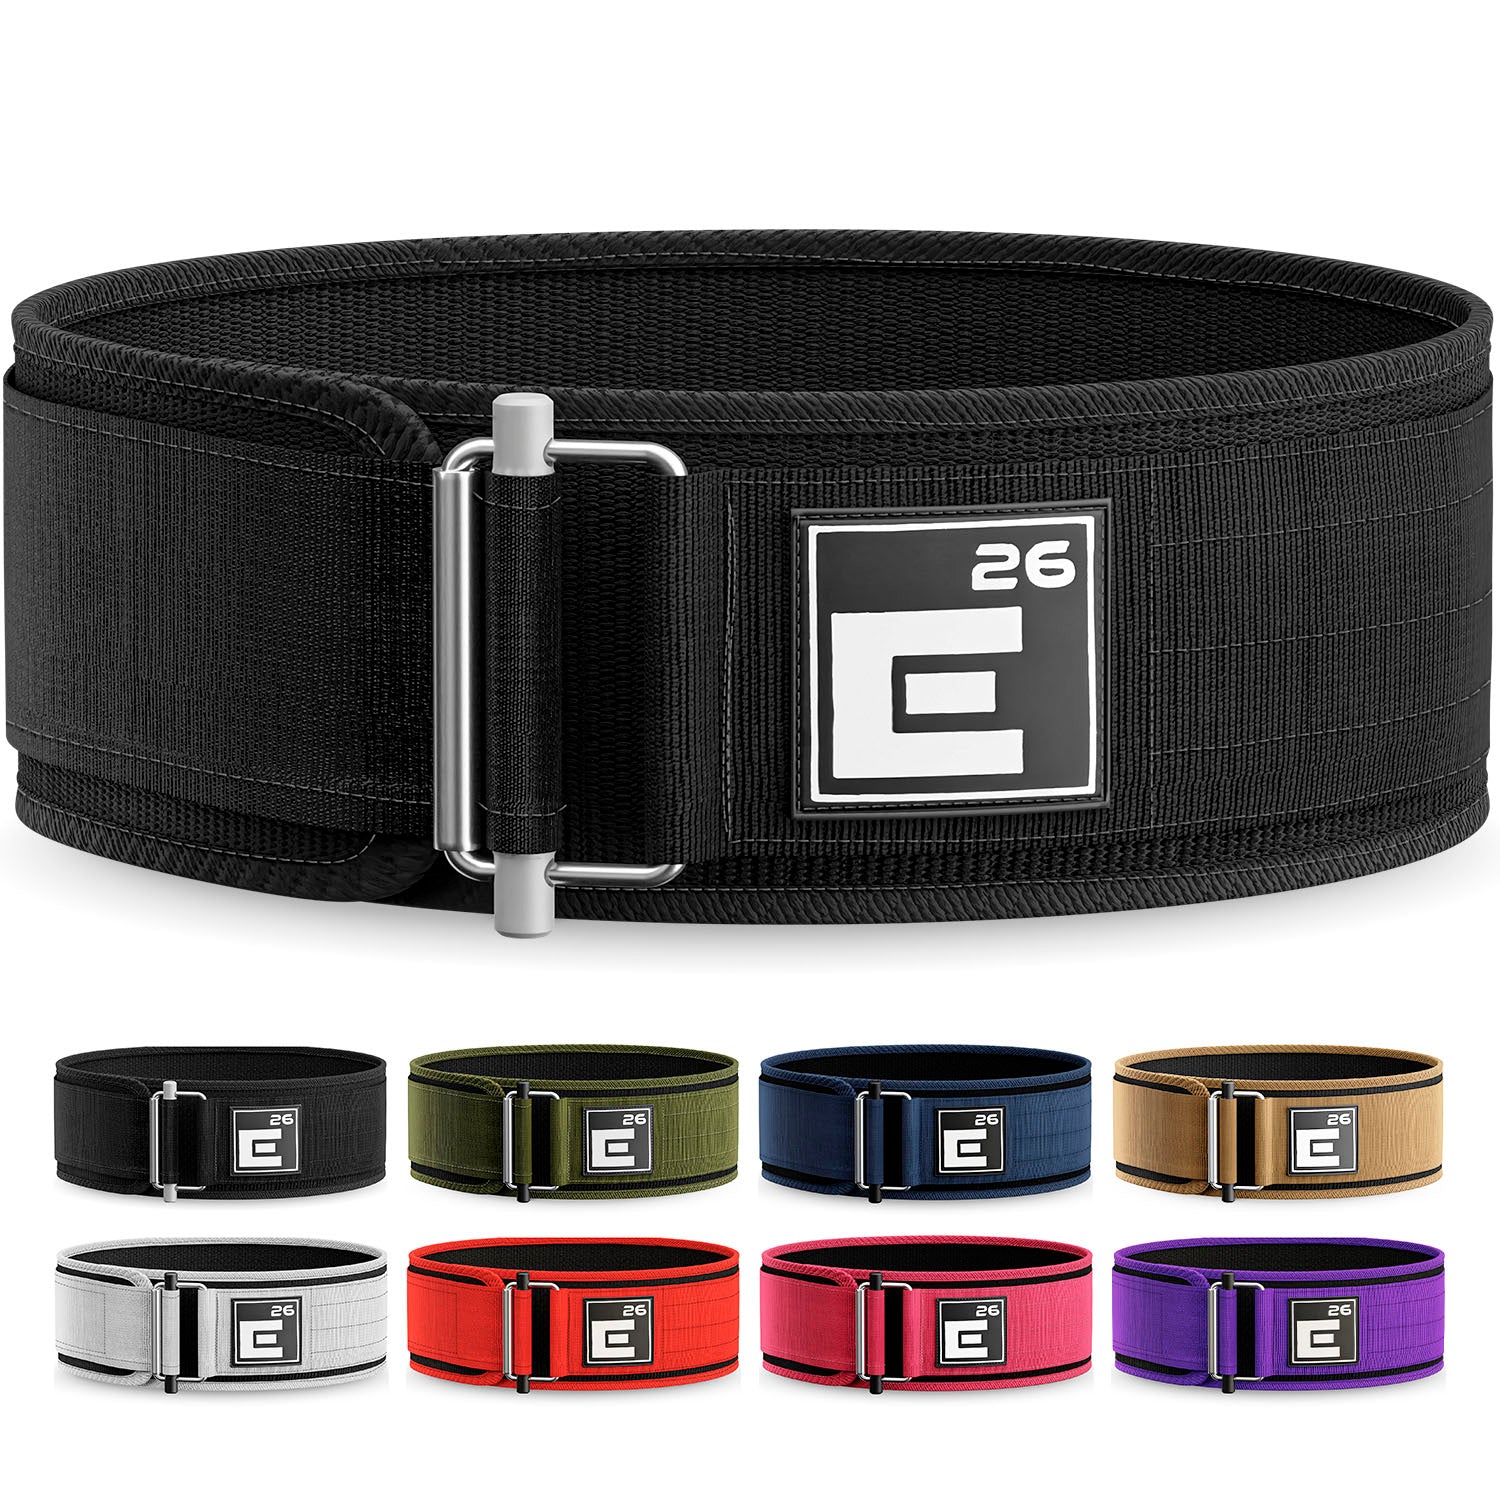 Element 26 Weightlifting Belt Self-Locking, Unisex, Adjustable & Nylon Fabric, Support Accessory, Lifetime 8 Colors Available